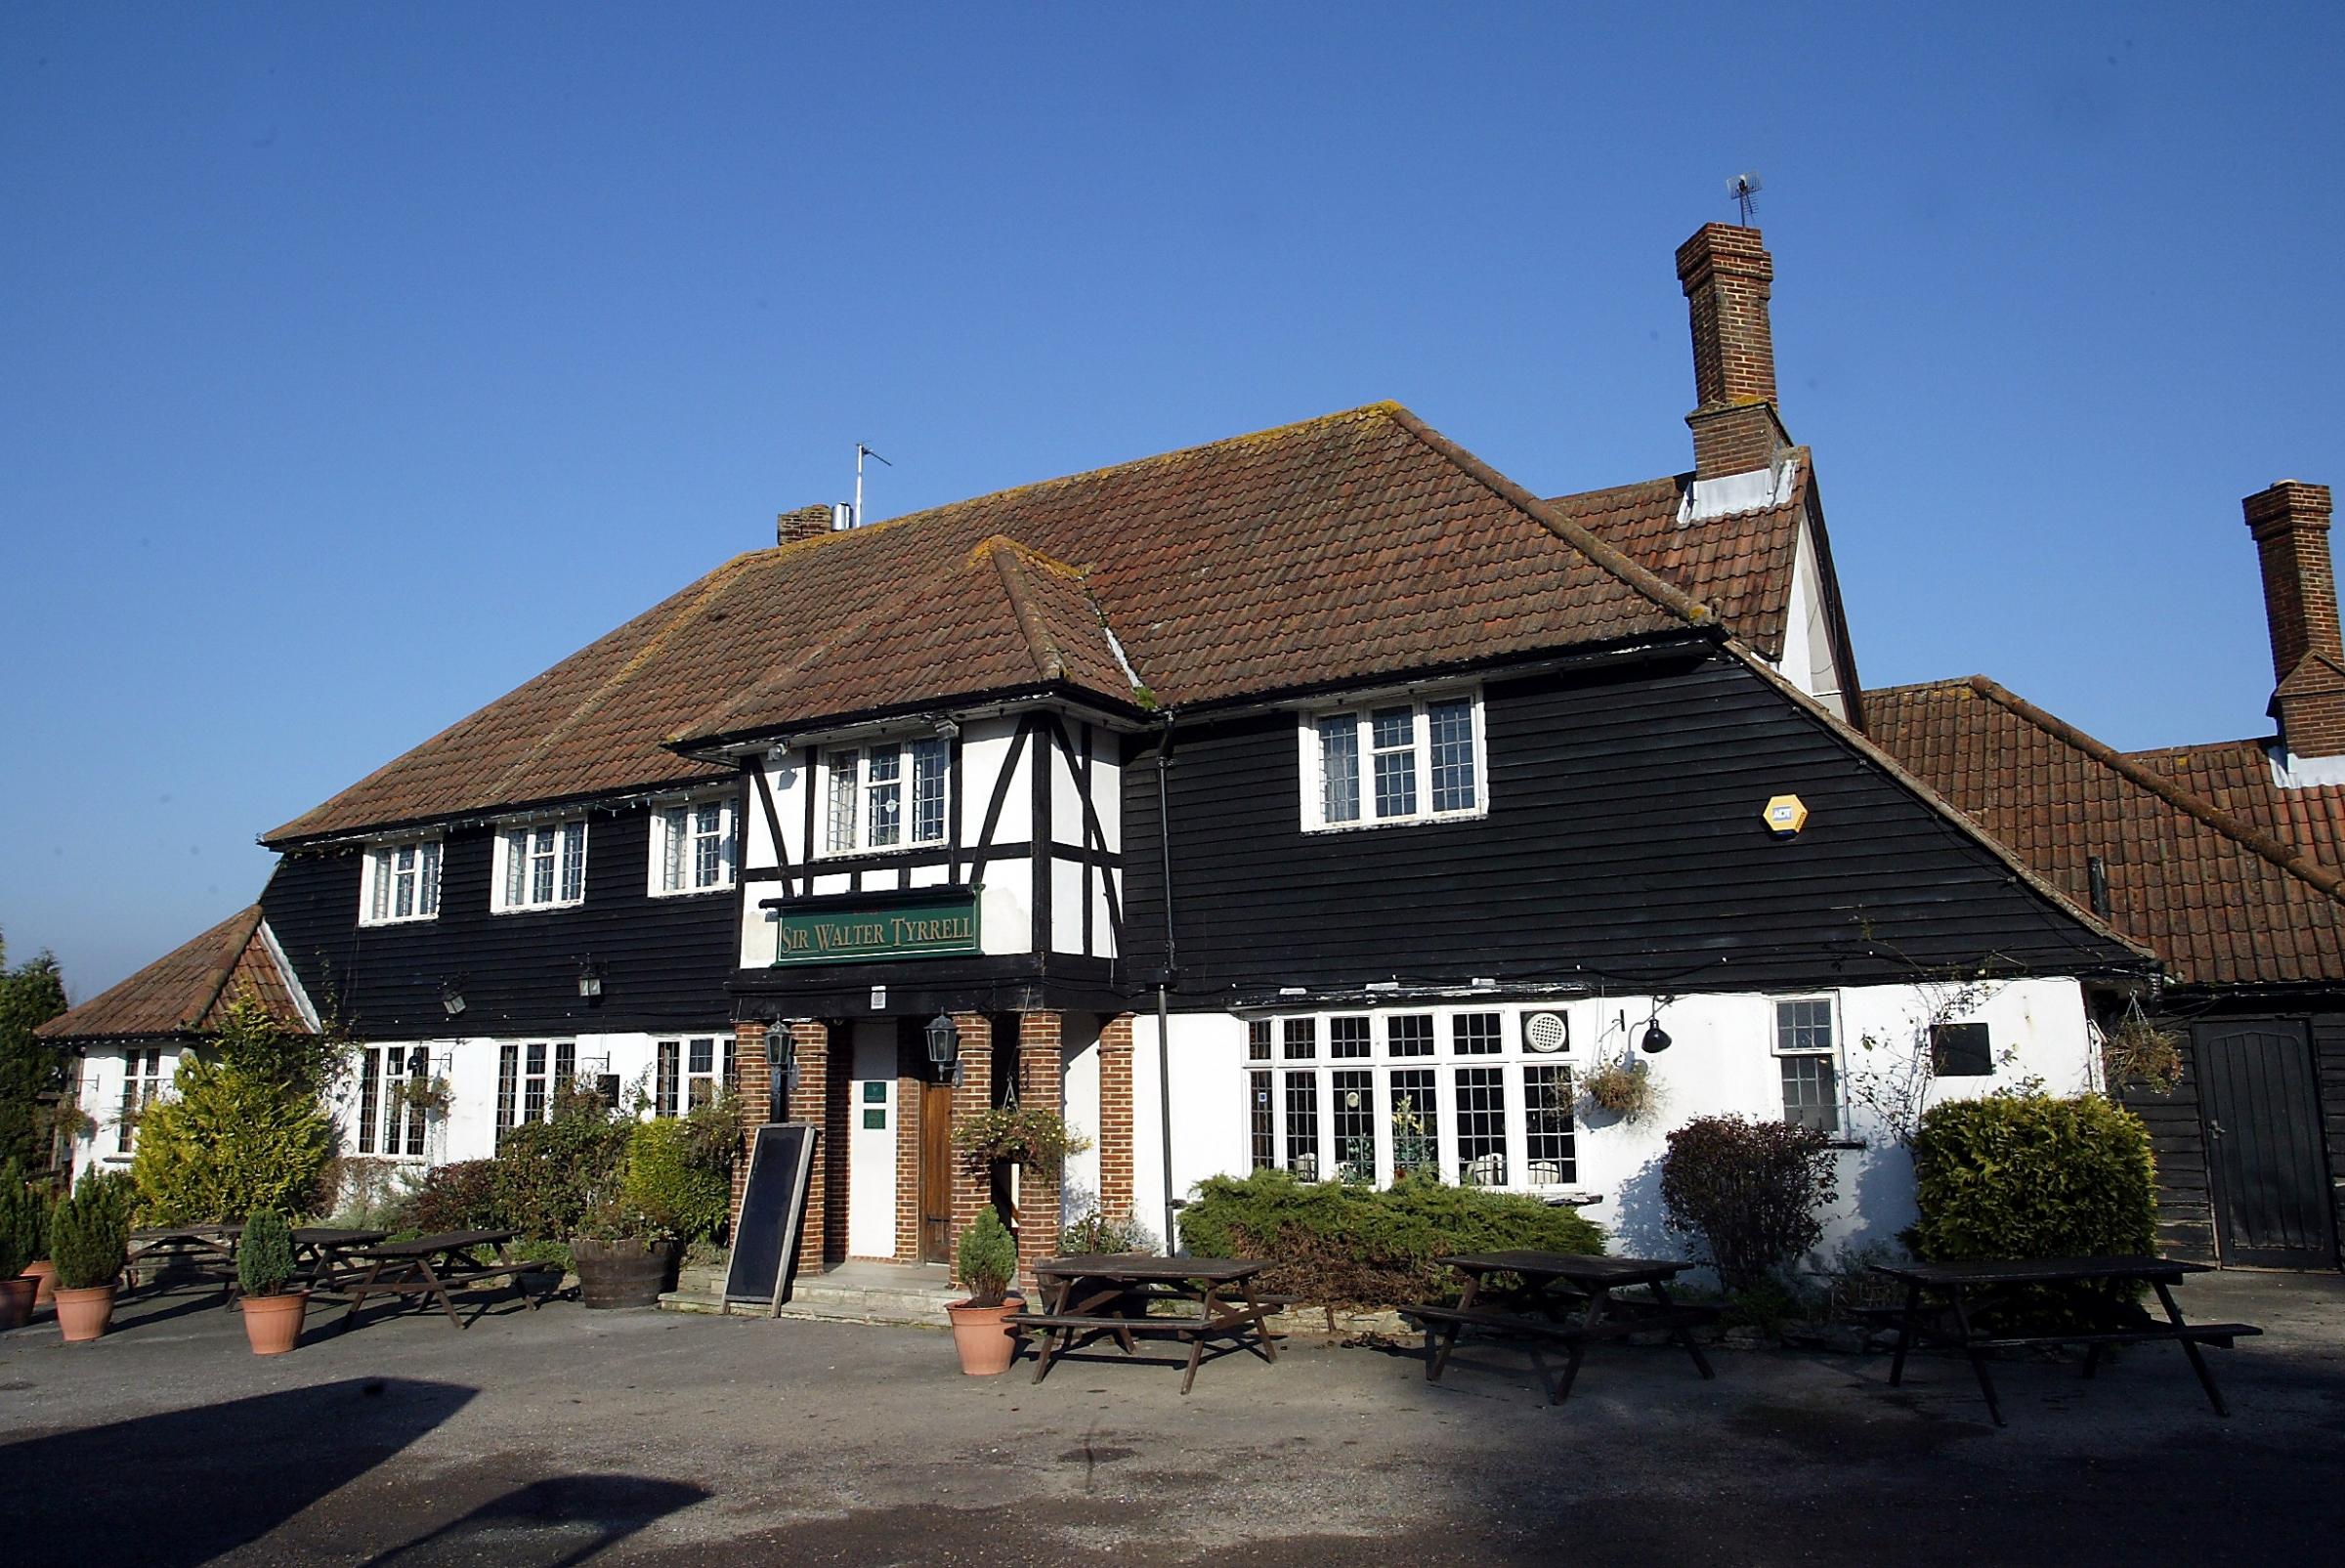 Pub review, Sir Walter Tyrrell at Brook.